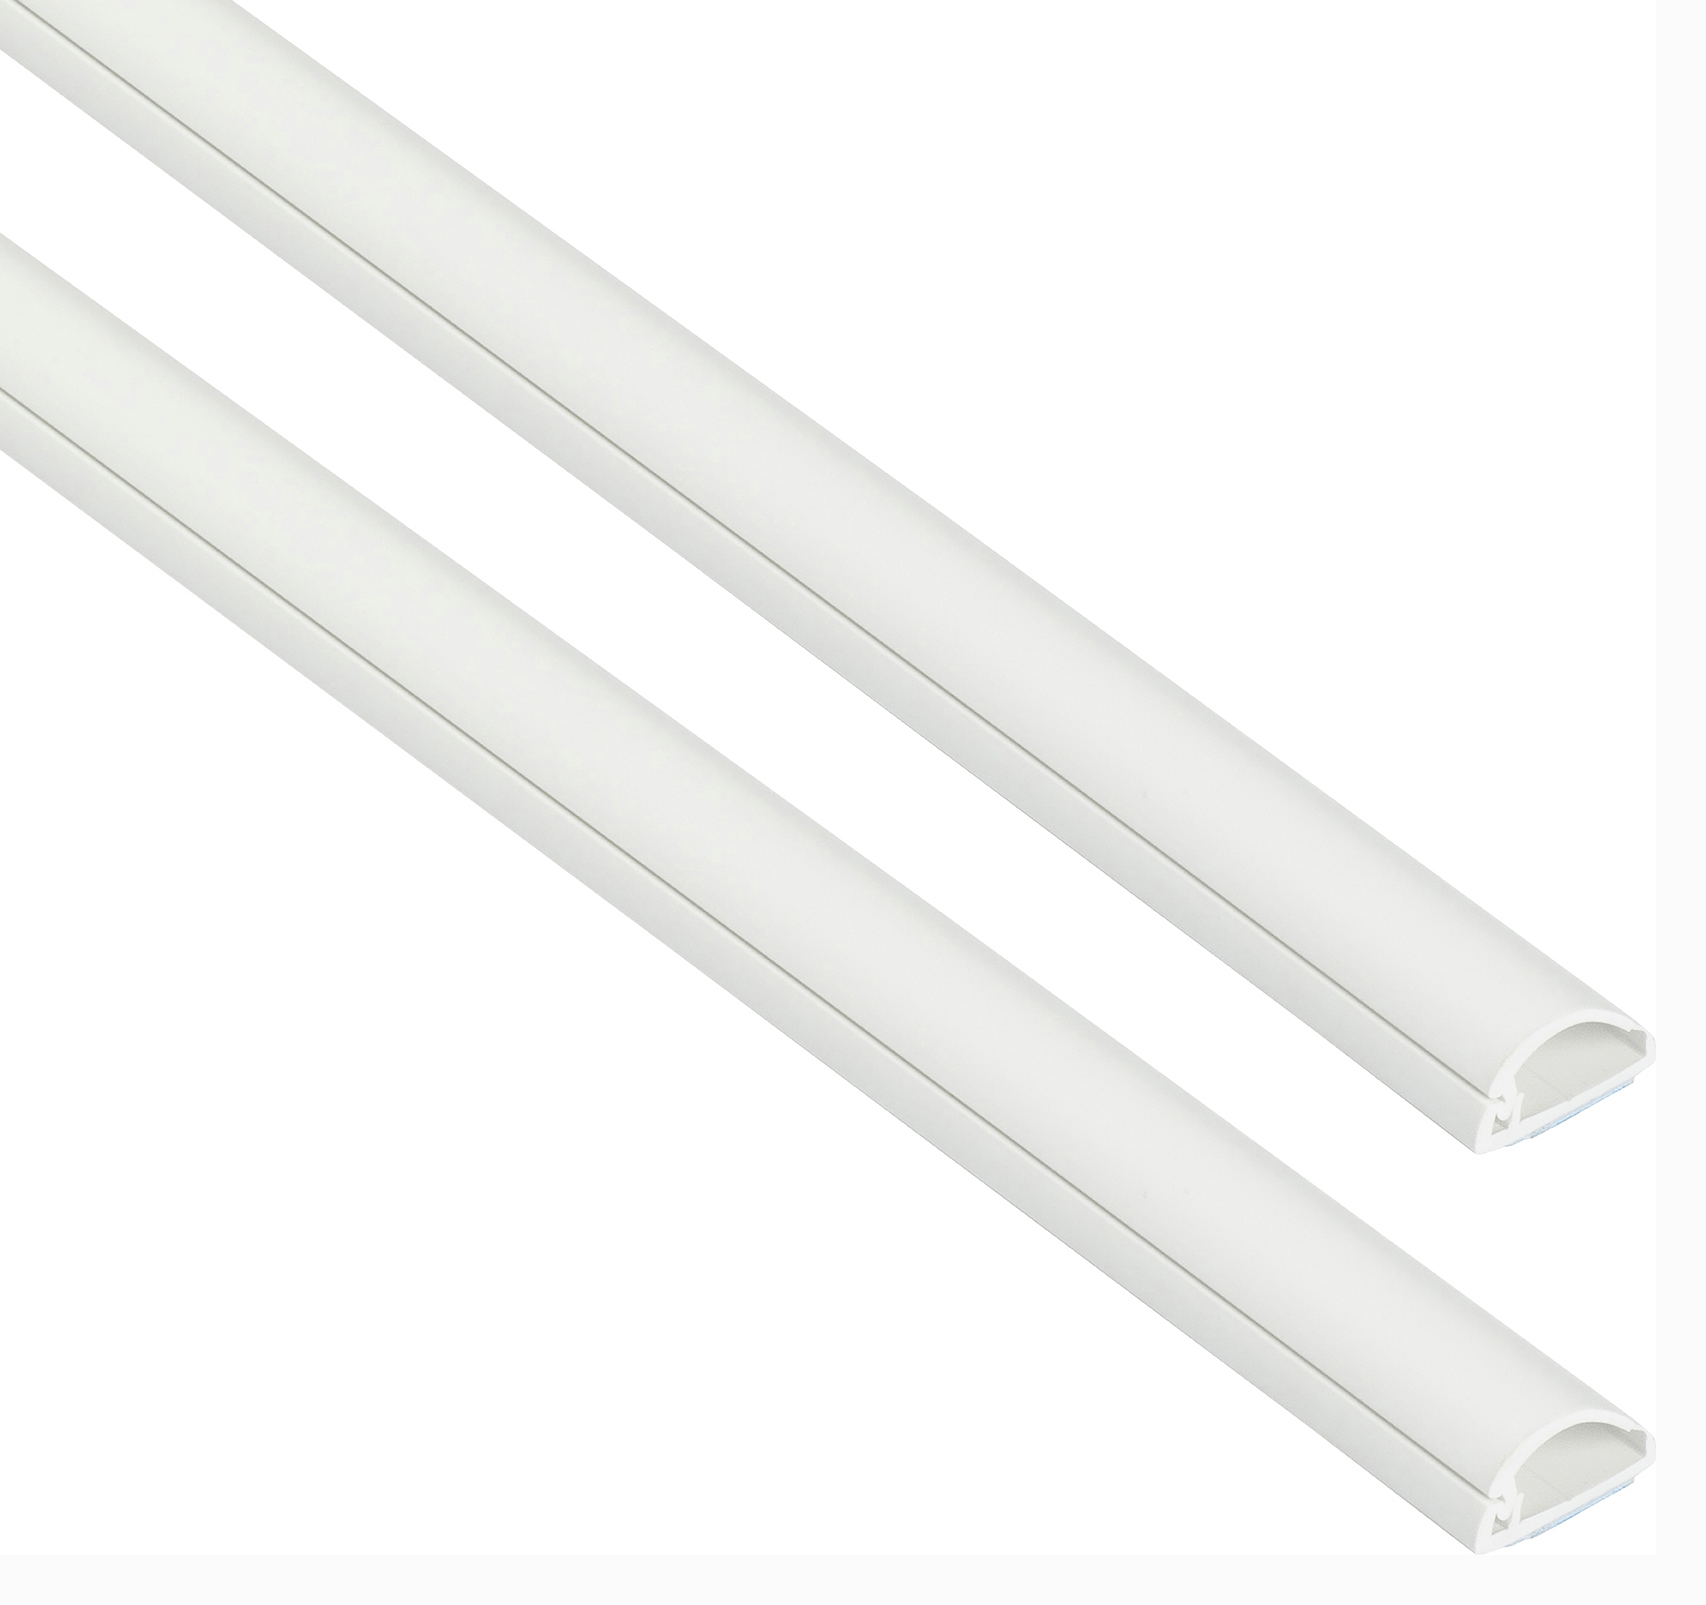 Image of D-Line Self-Adhesive 1/2 Circle Decorative White Micro-Trunking - 16 x 8 x 2000mm - Pack of 2